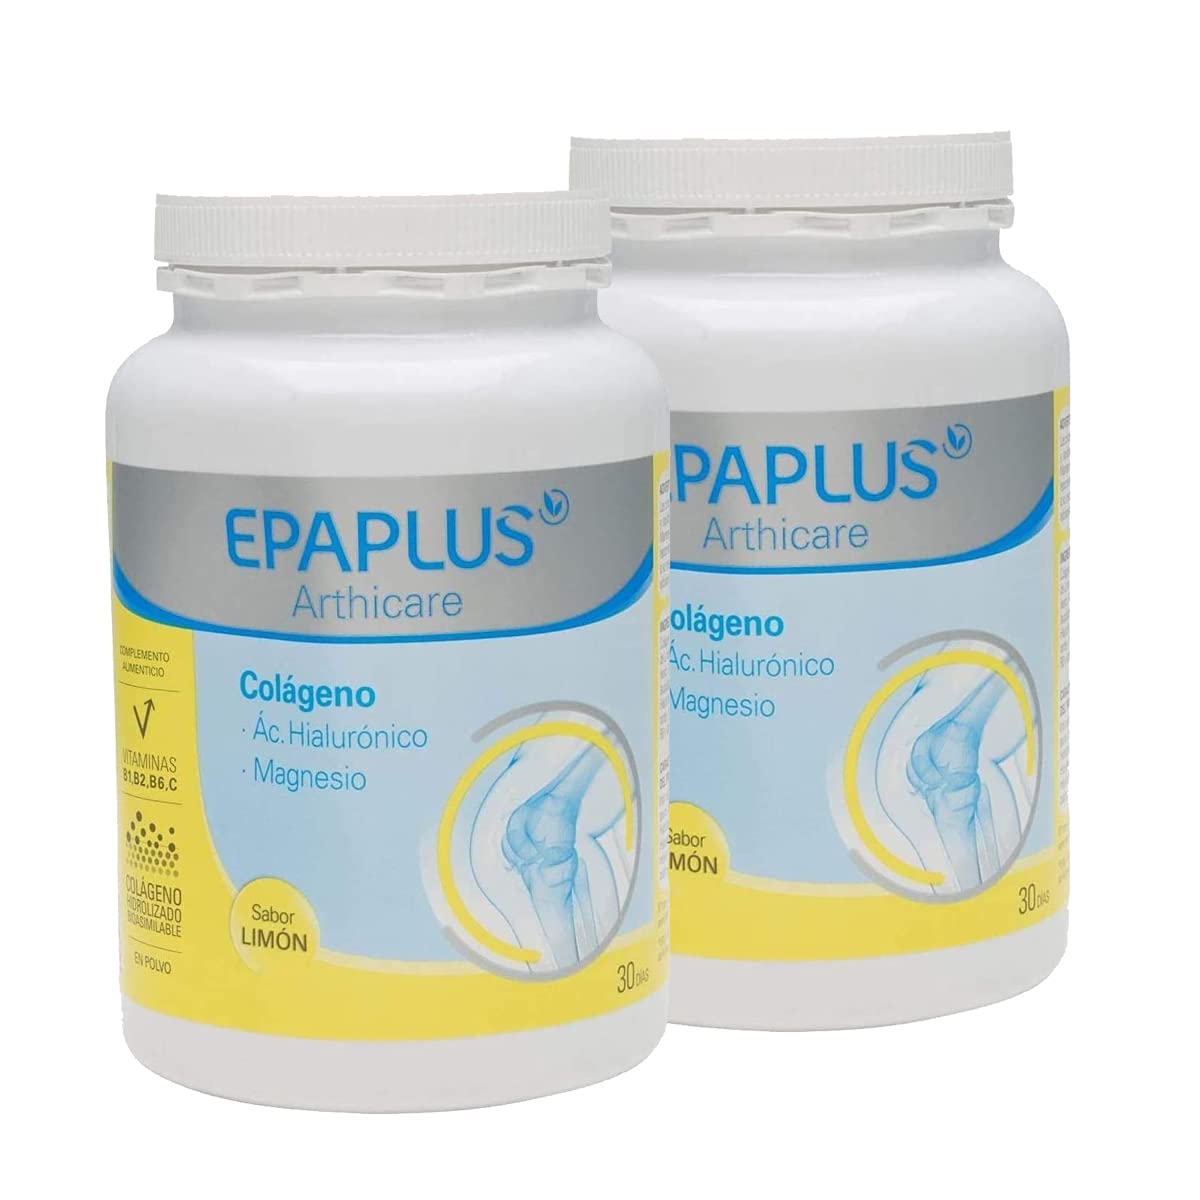 2 Pack EPAPLUS ARTHICARE Hydrolyzed Collagen Lemon Flavor 332g/11.7oz Powder - with Hyaluronic Acid and Magnesium - Helps Strengthen Bones, Tendons...